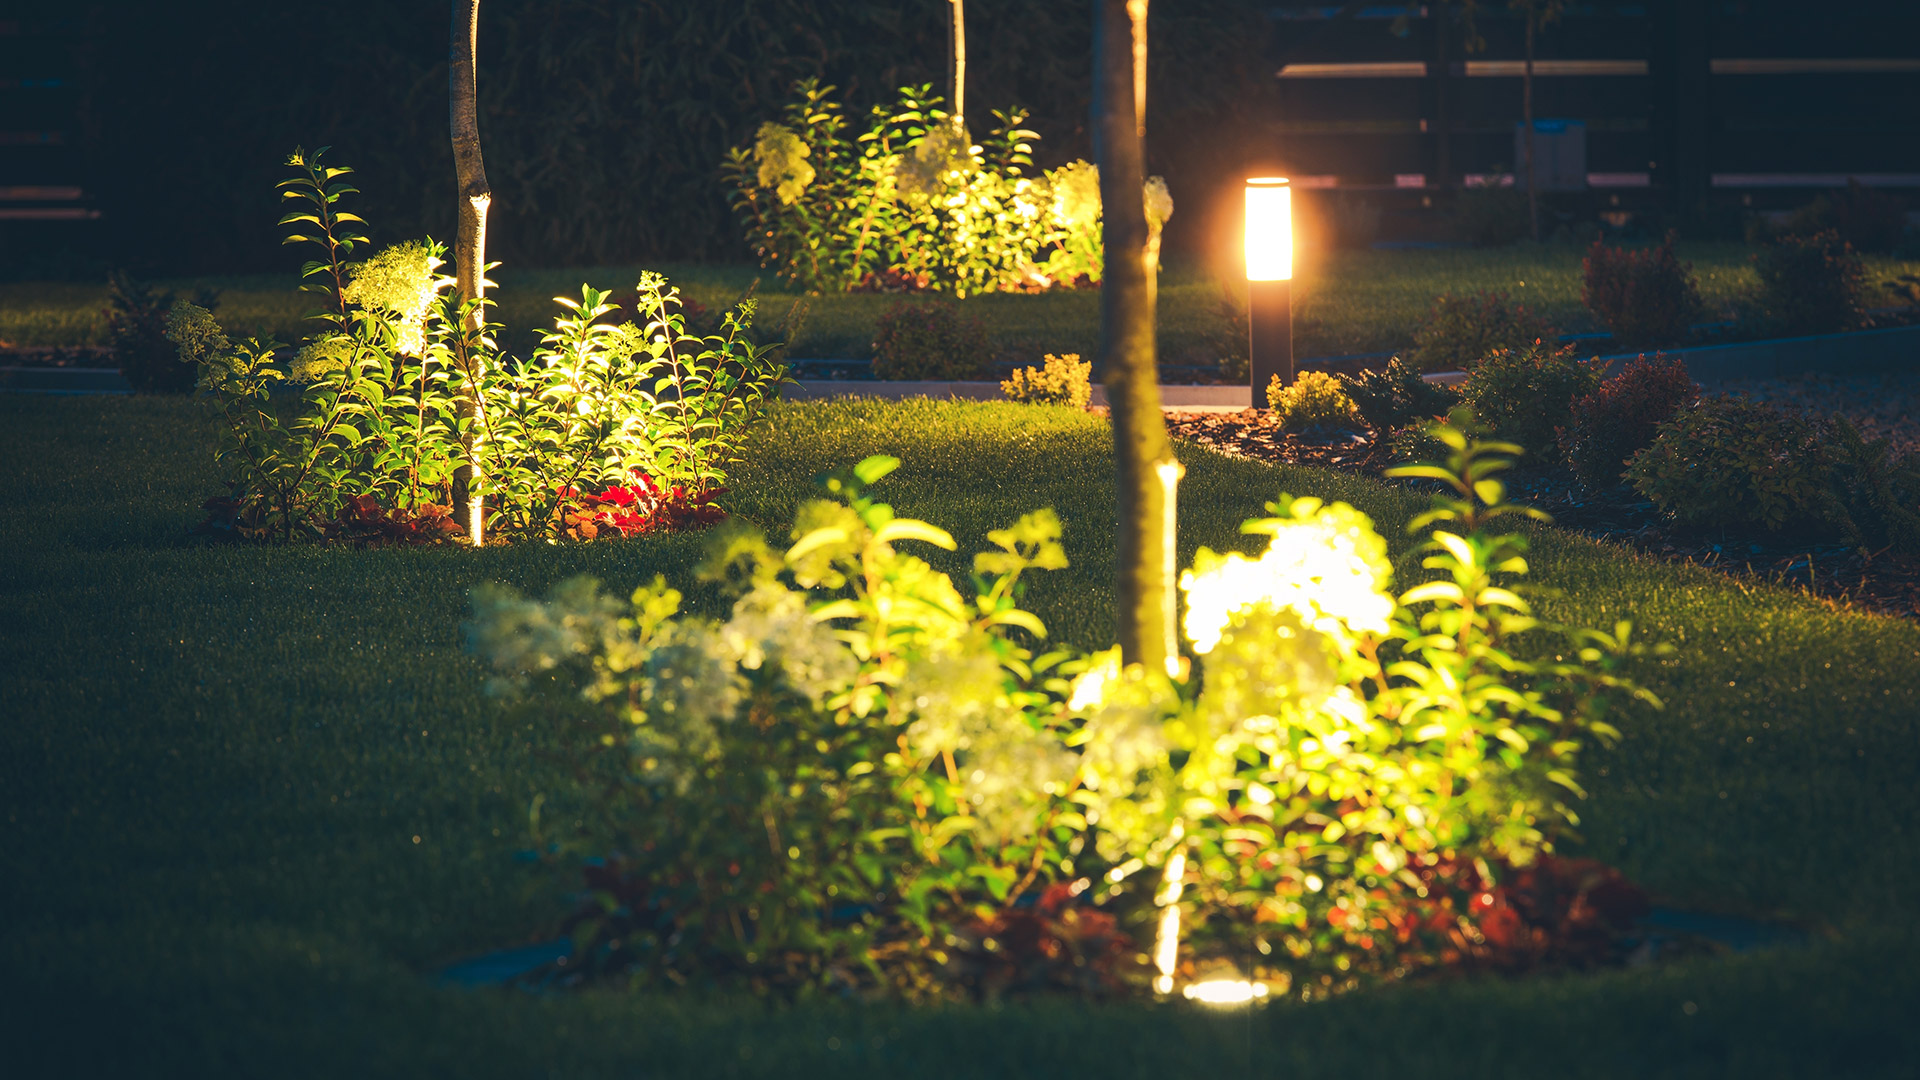 A few landscape beds lit up in the evening by a home in Saylorville, IA.